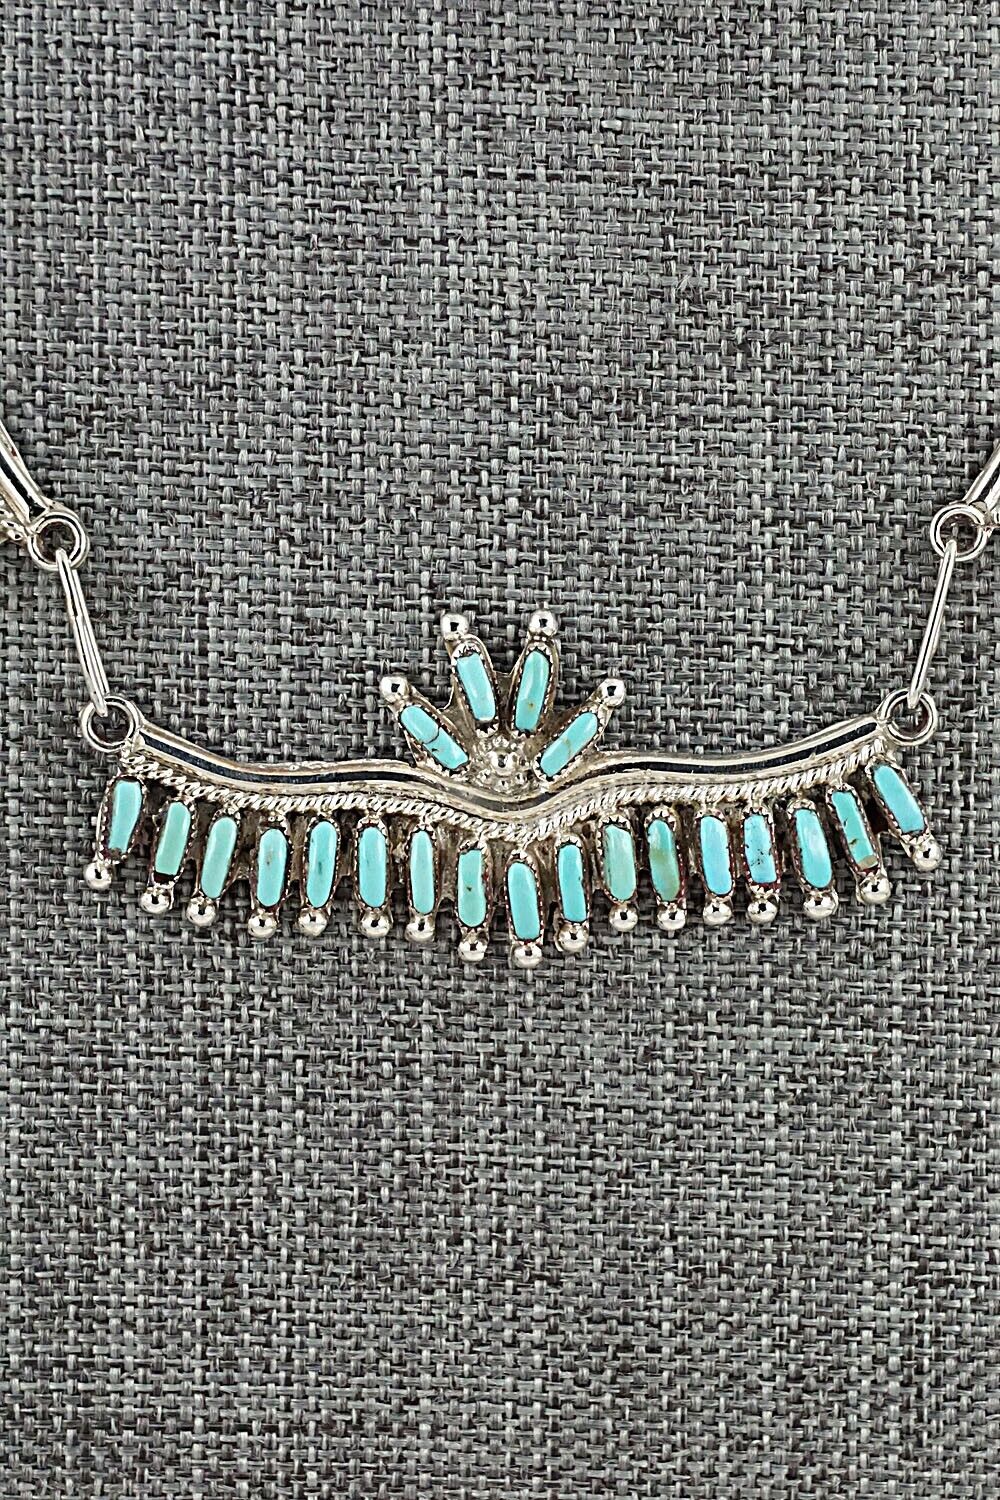 Turquoise & Sterling Silver Necklace and Earrings Set - Veronica Yawakia